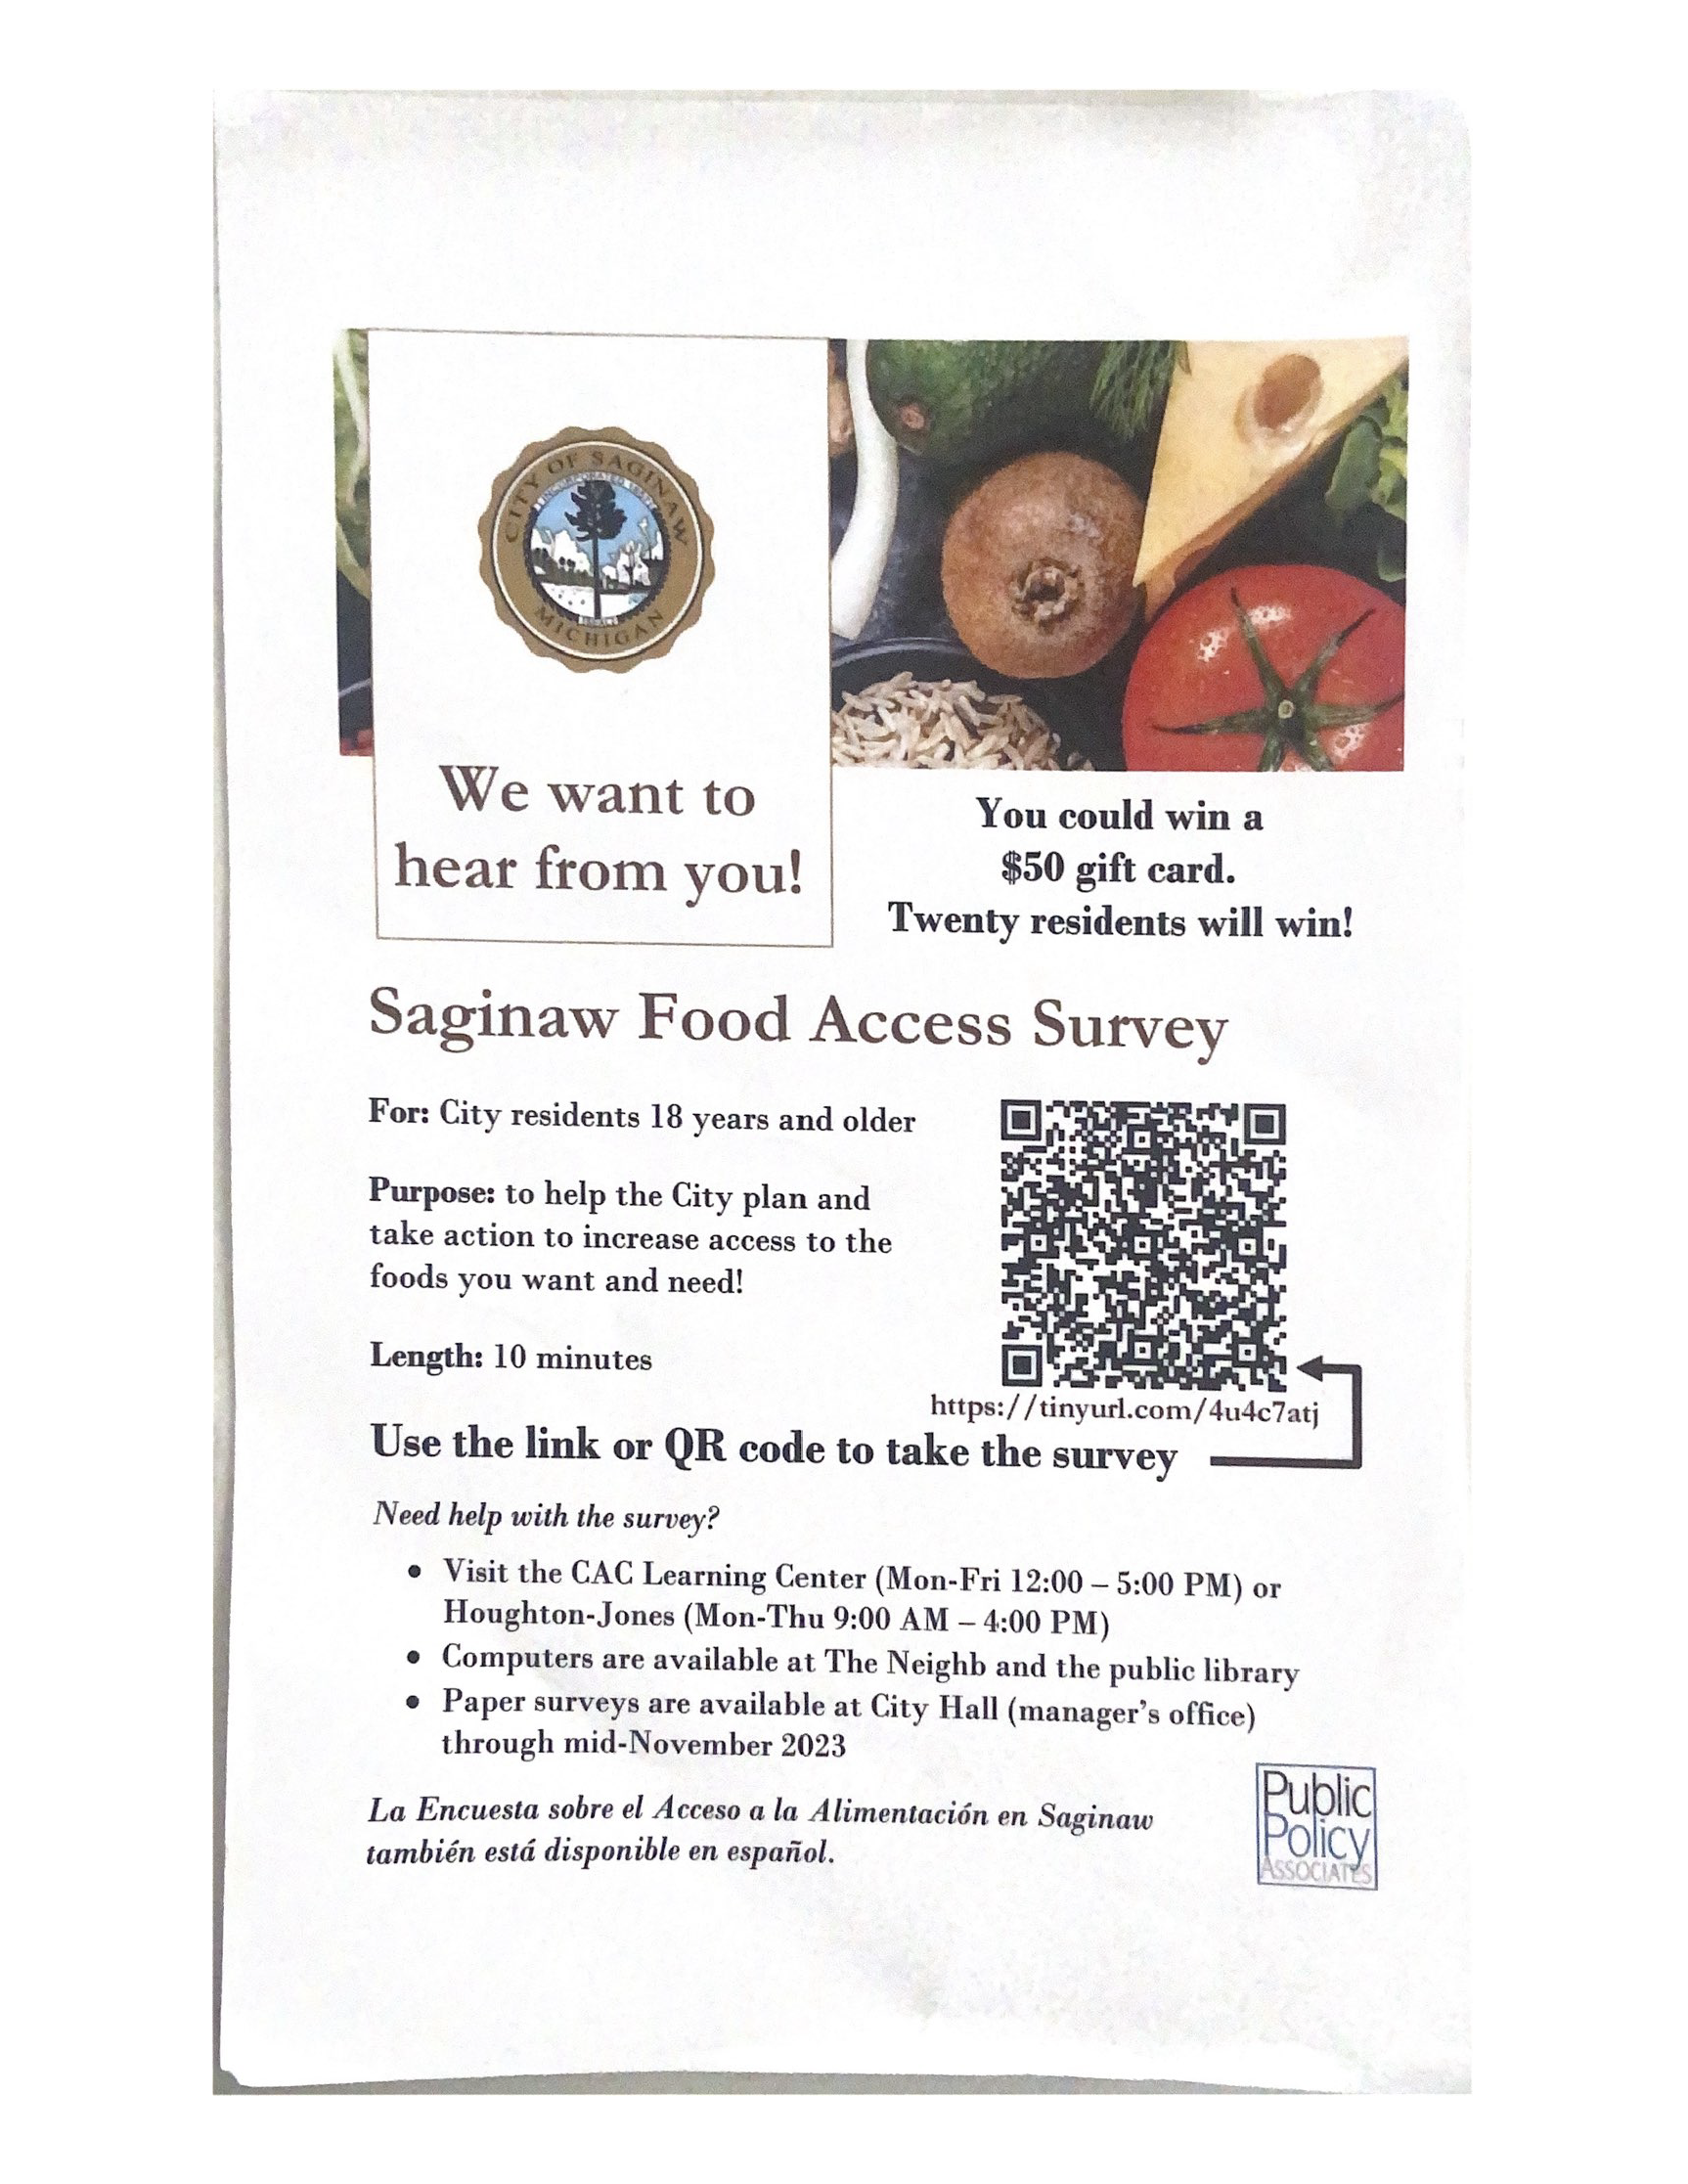 <h1 class="tribe-events-single-event-title">Take the Saginaw Food Access Survey to win a gift card!</h1>